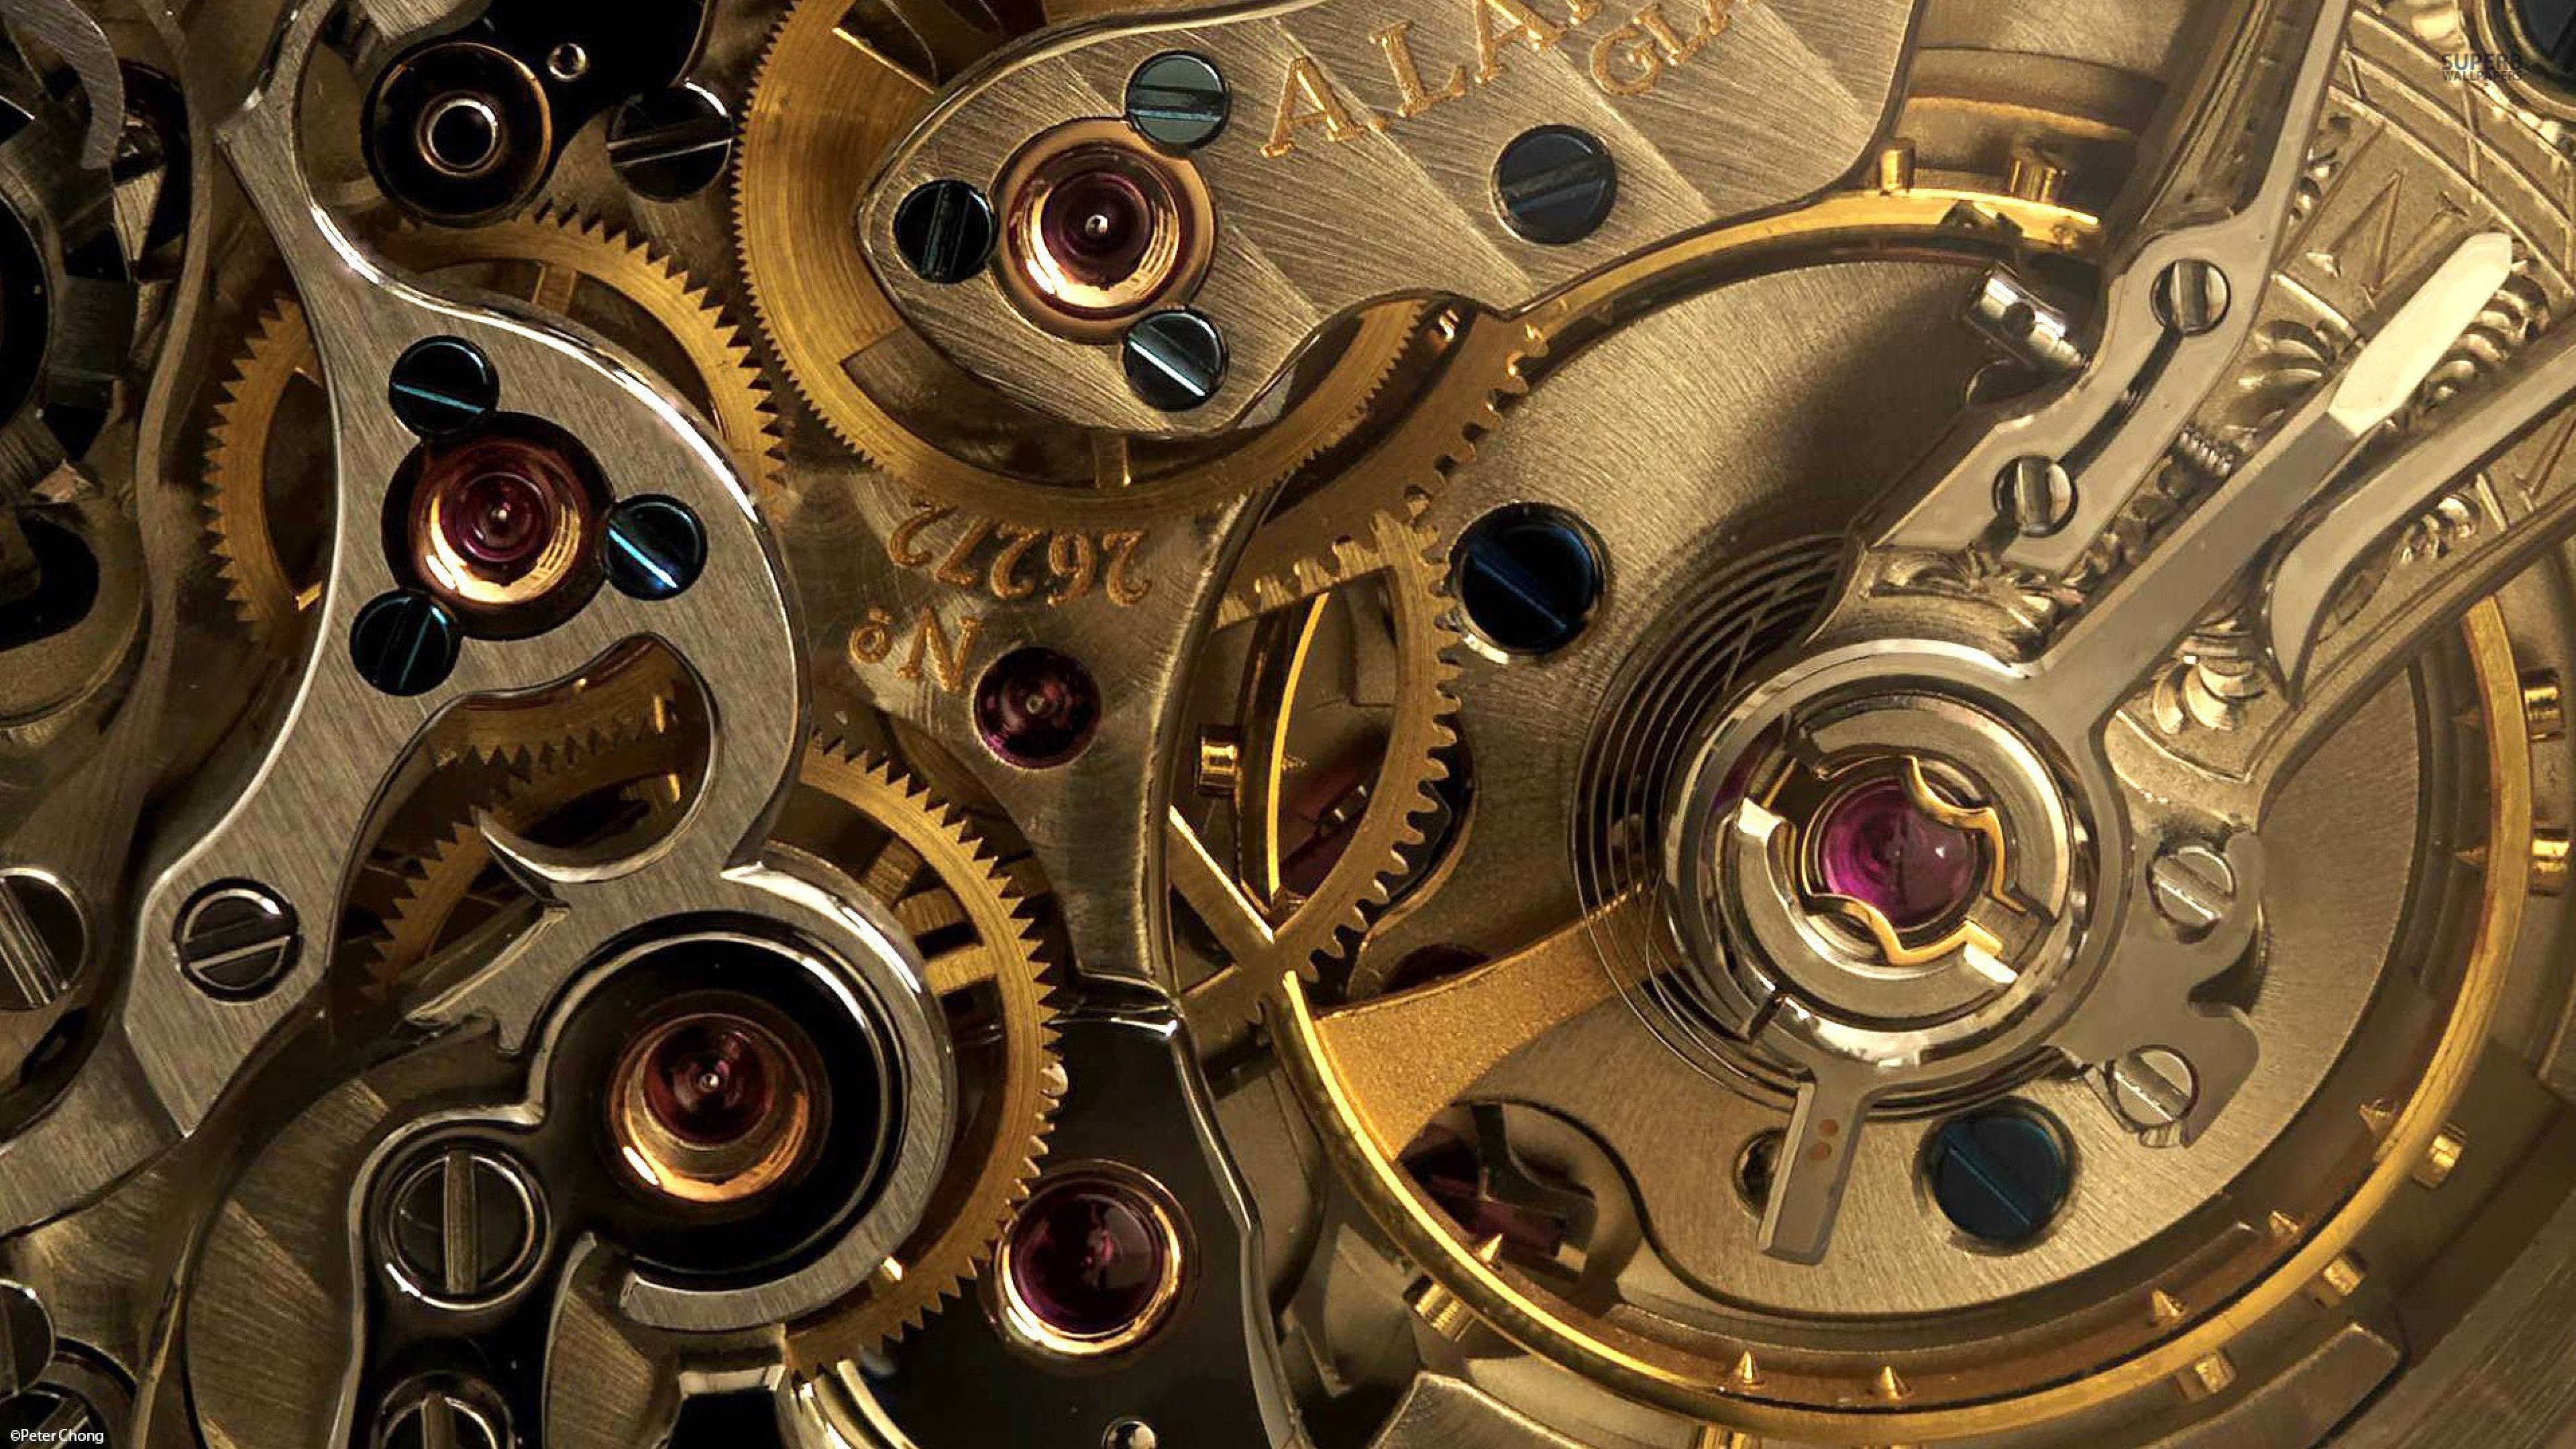 Mechanical Engineering Wallpapers (56+ images)